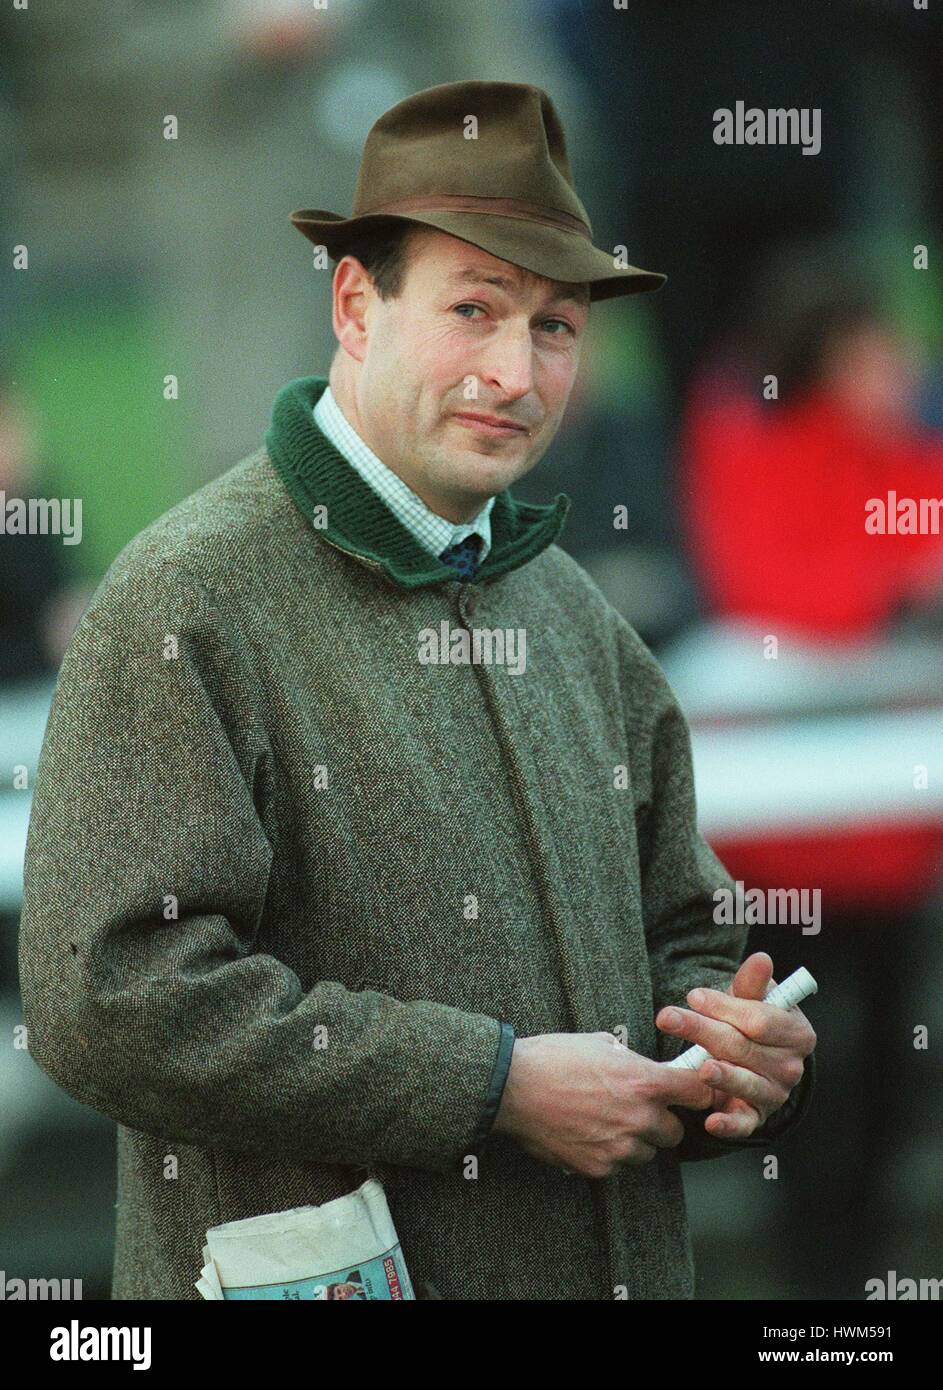 NOT W.A.BETHEL NIGEL CAPTIONED RACEHORSE TRAINER 03 April 1996 Stock Photo